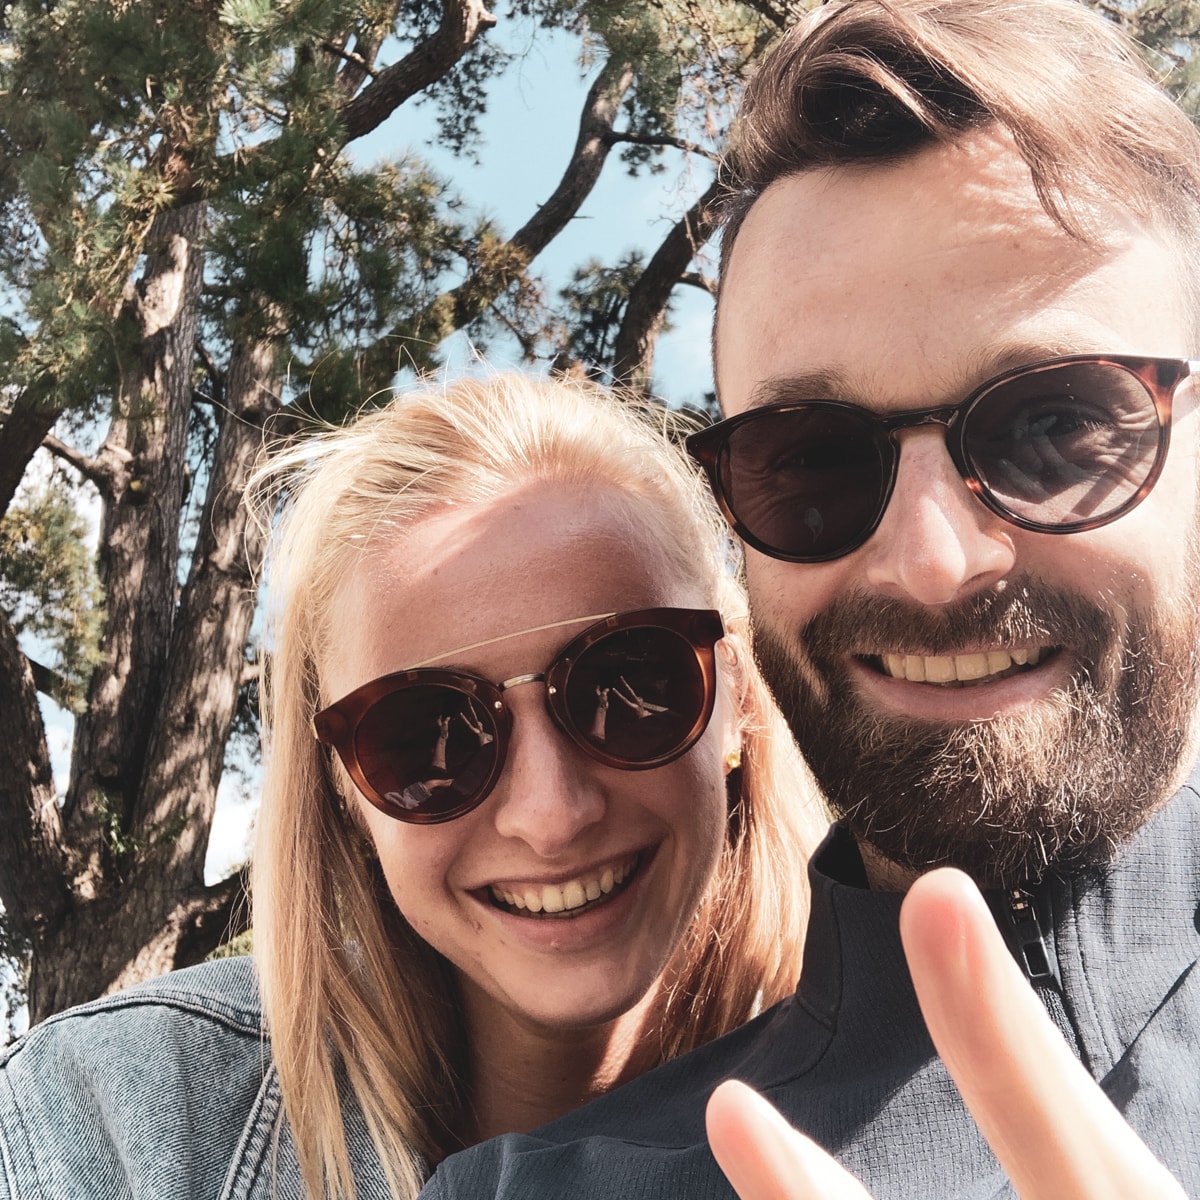 Simon and Tally Date Selfie | DNAfit Blog